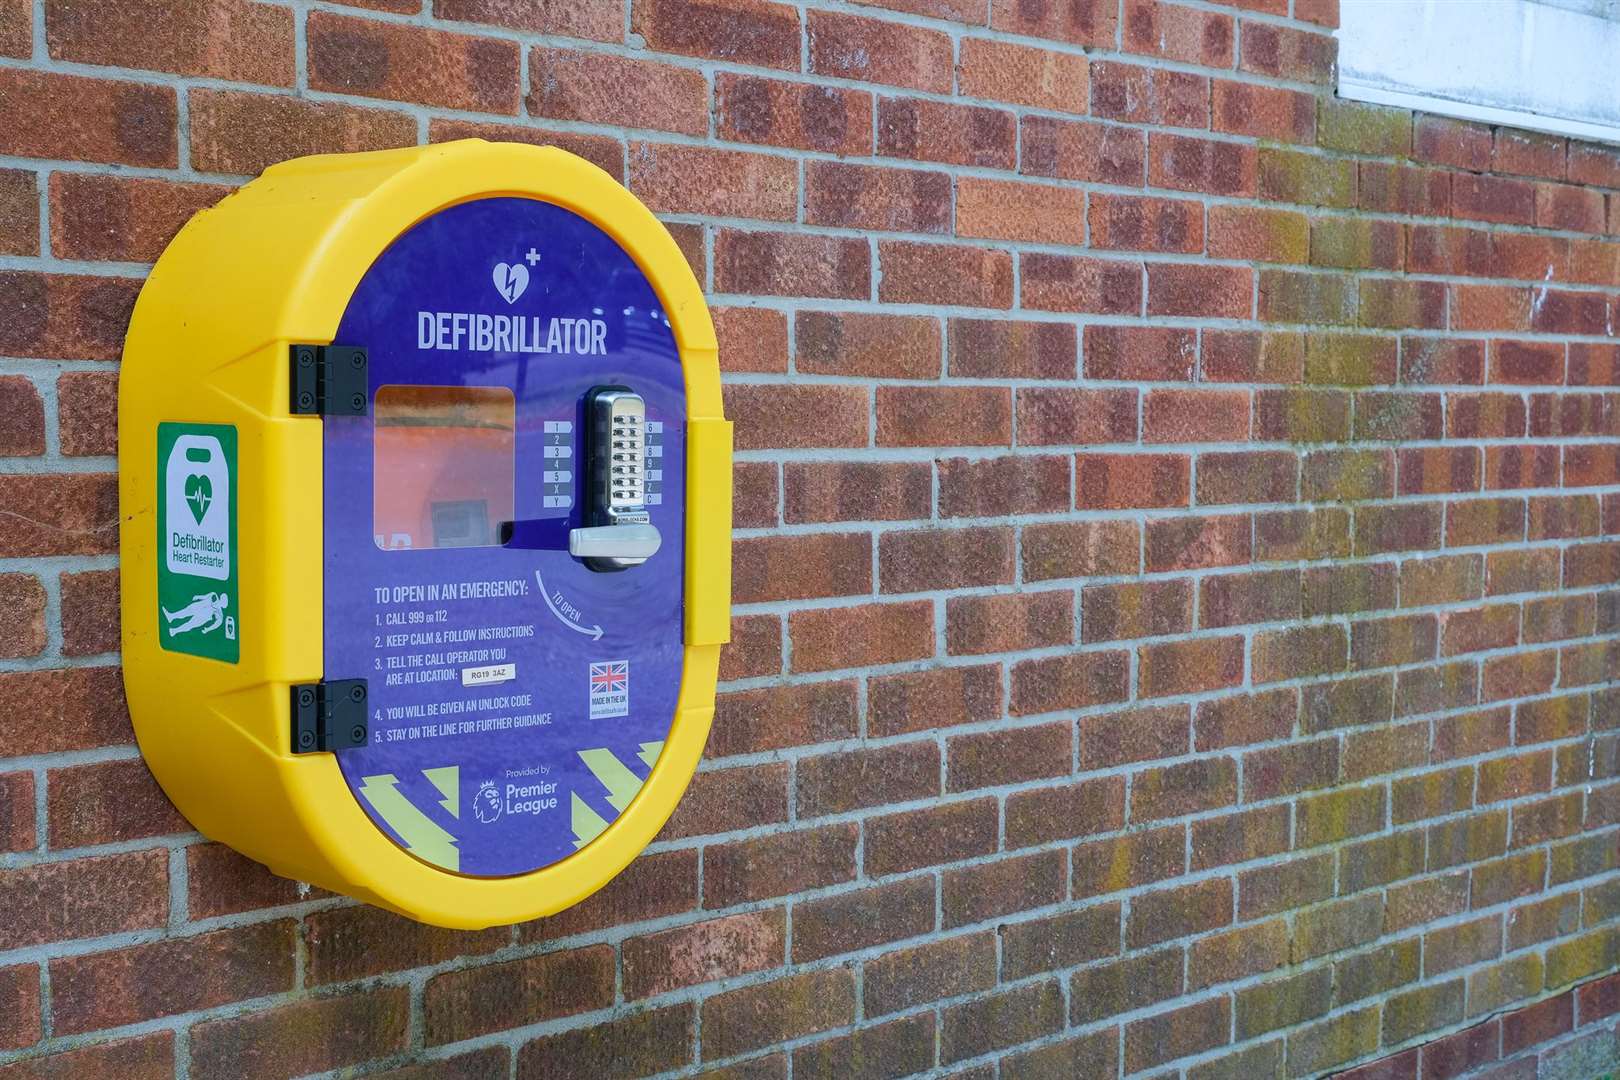 External cabinets will help schools make their defibrillators available to communities